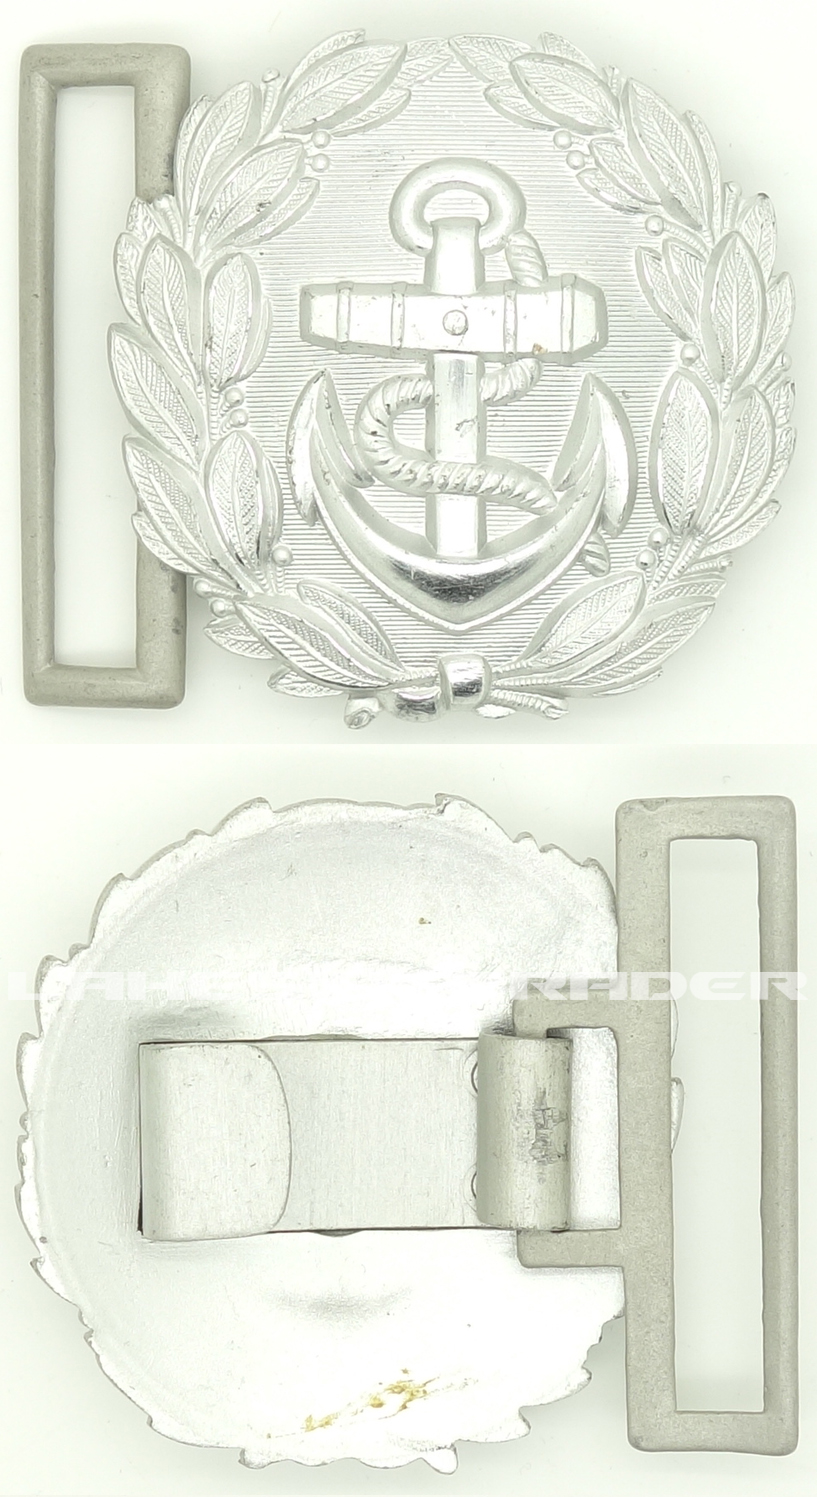 Navy Administrative Officers Belt Buckle